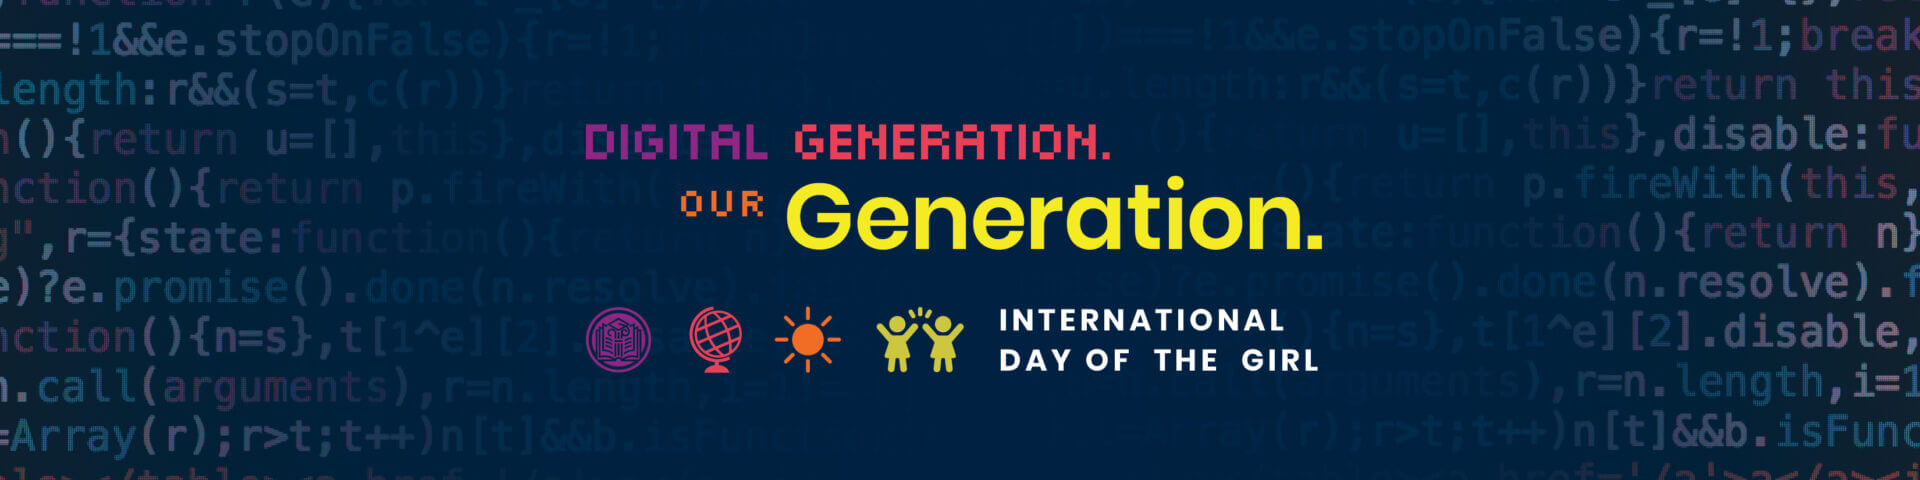 International Day of the Girl 2021. Digital Generation. Our Generation.